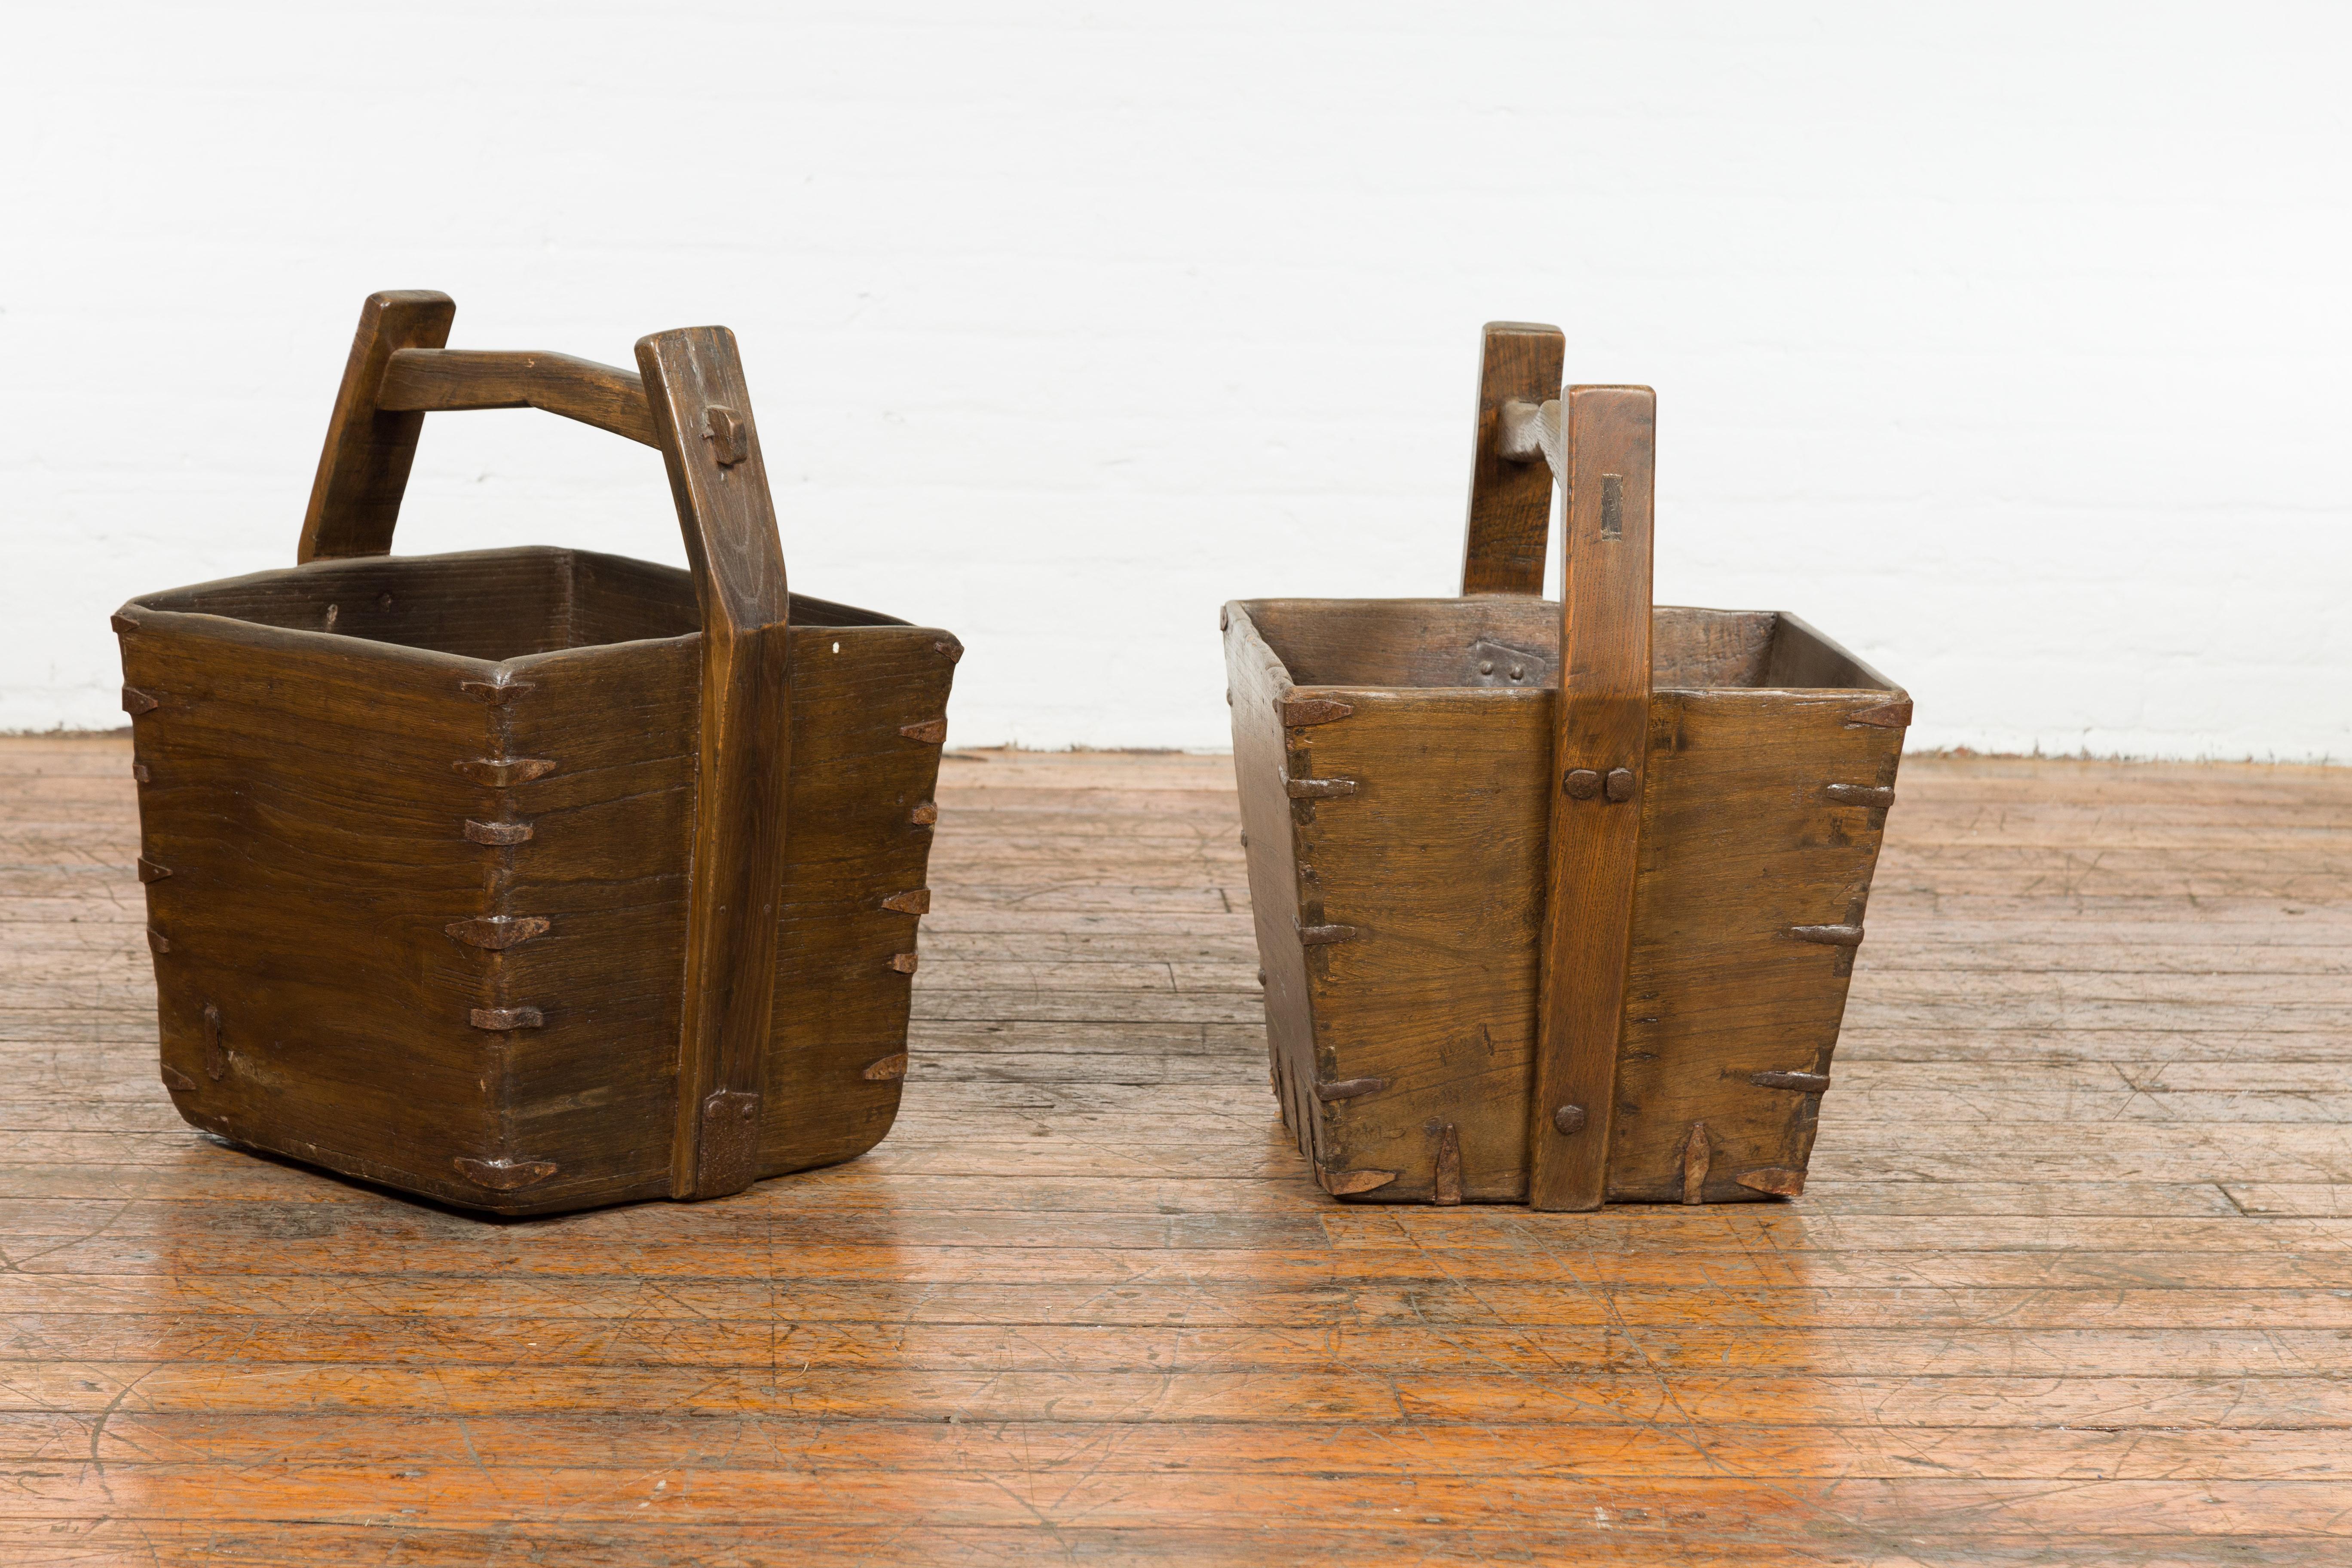 Rustic Antique Chinese Wood and Metal Grain Baskets with Carrying Handles, Sold Each For Sale